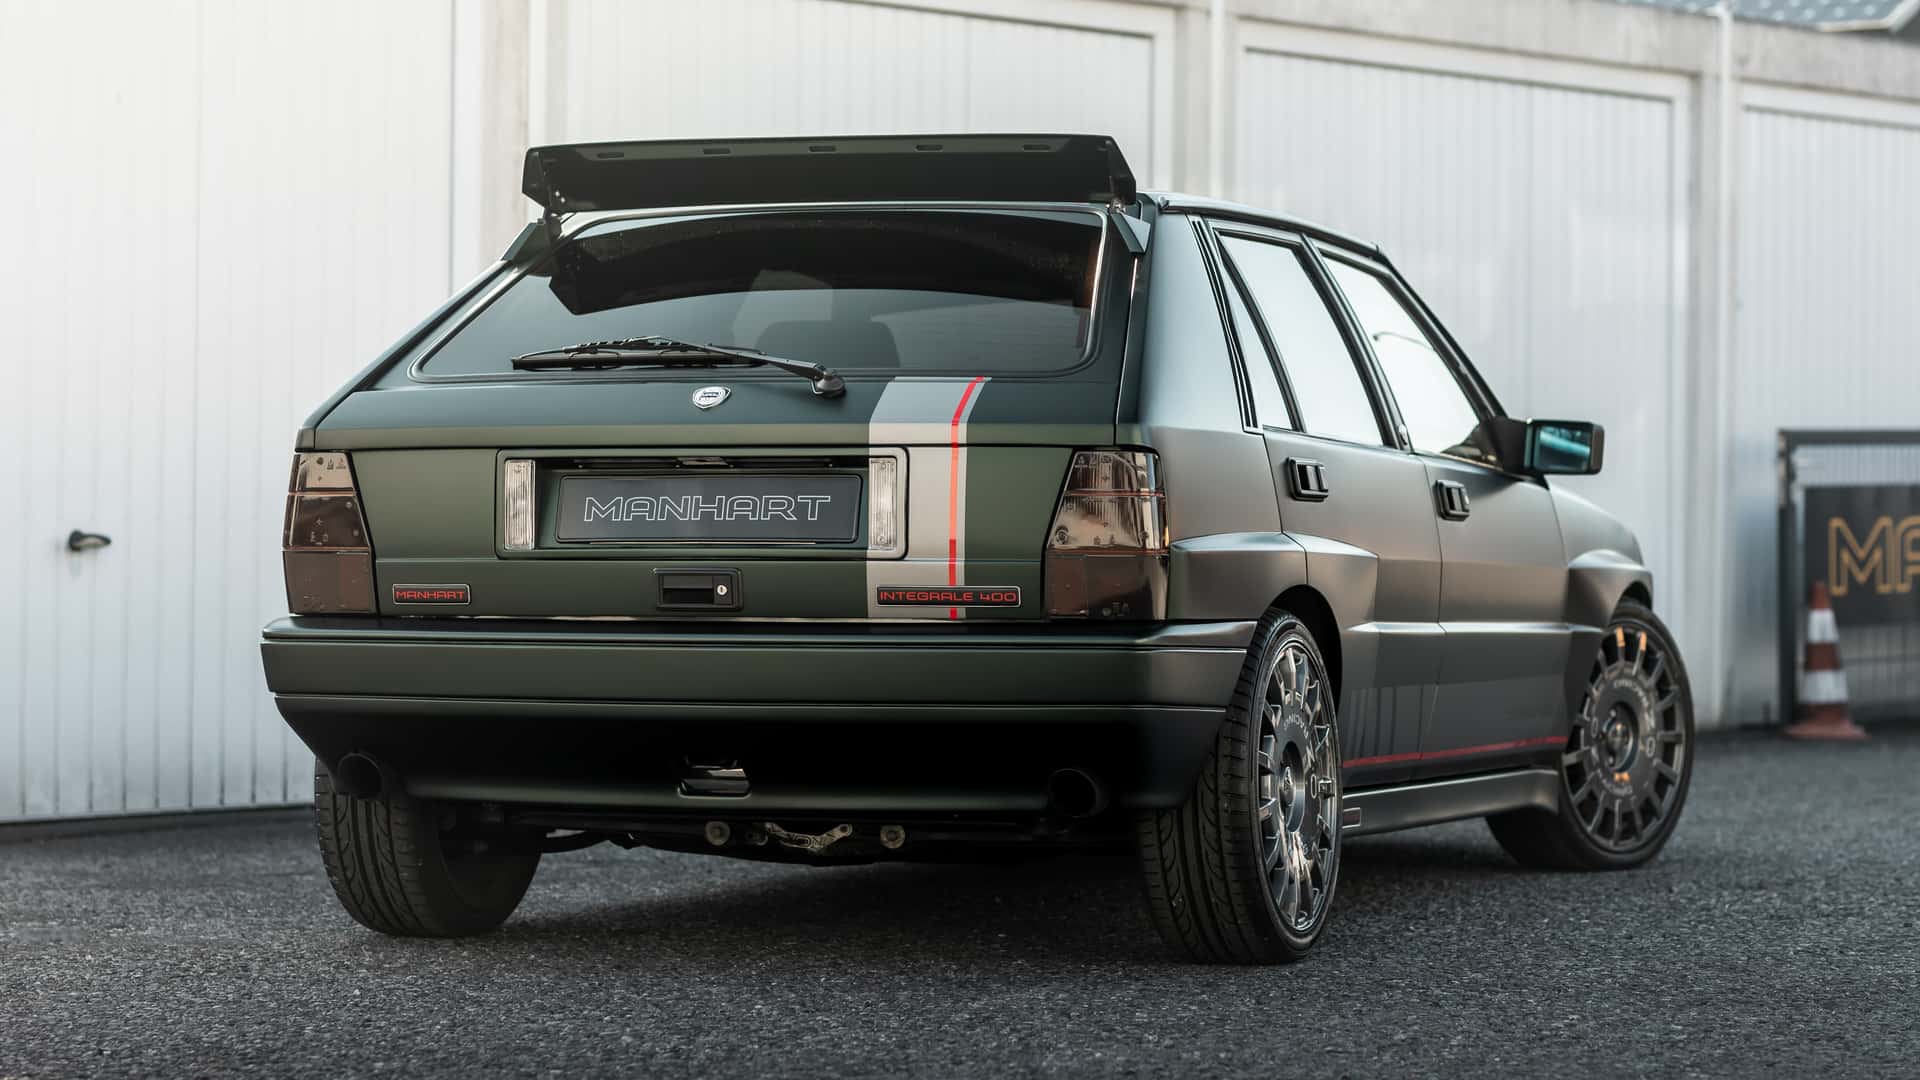 manhart tuned the hell out of the lancia delta integrale 5